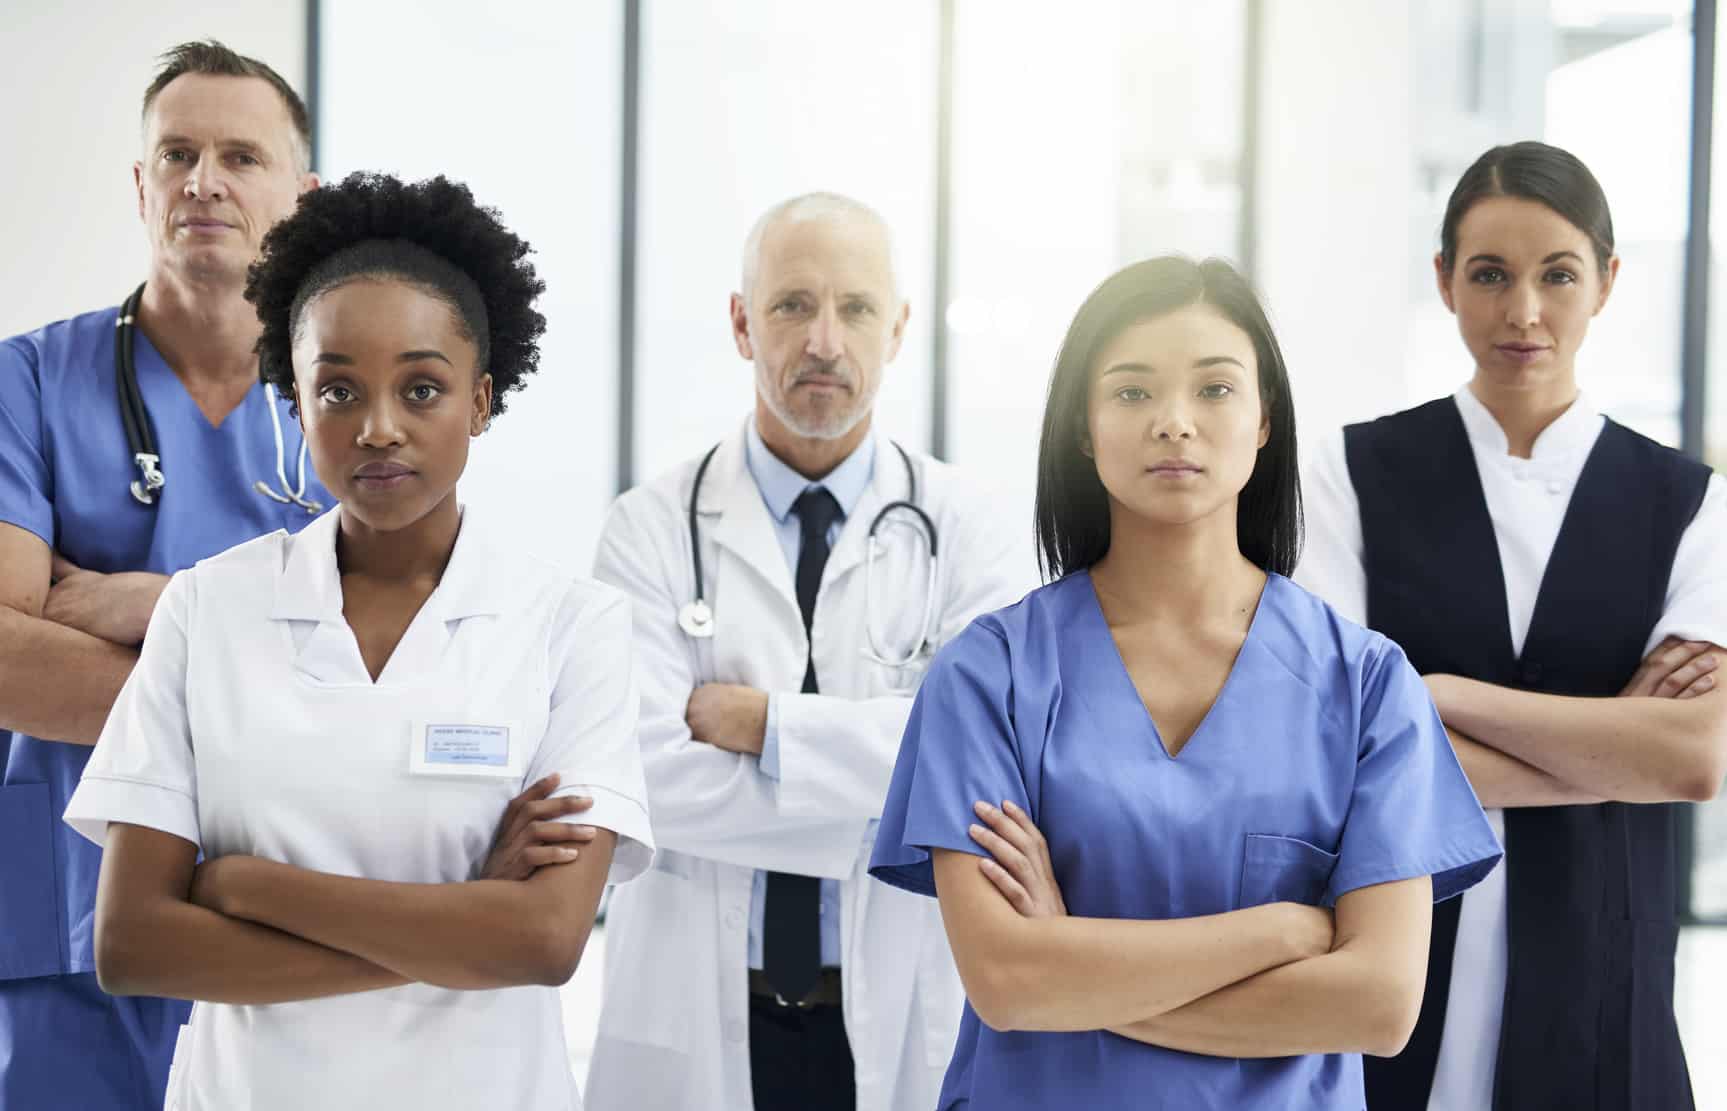 Cropped portrait of a group of medical professionals standing with their arms crossed in a hospital